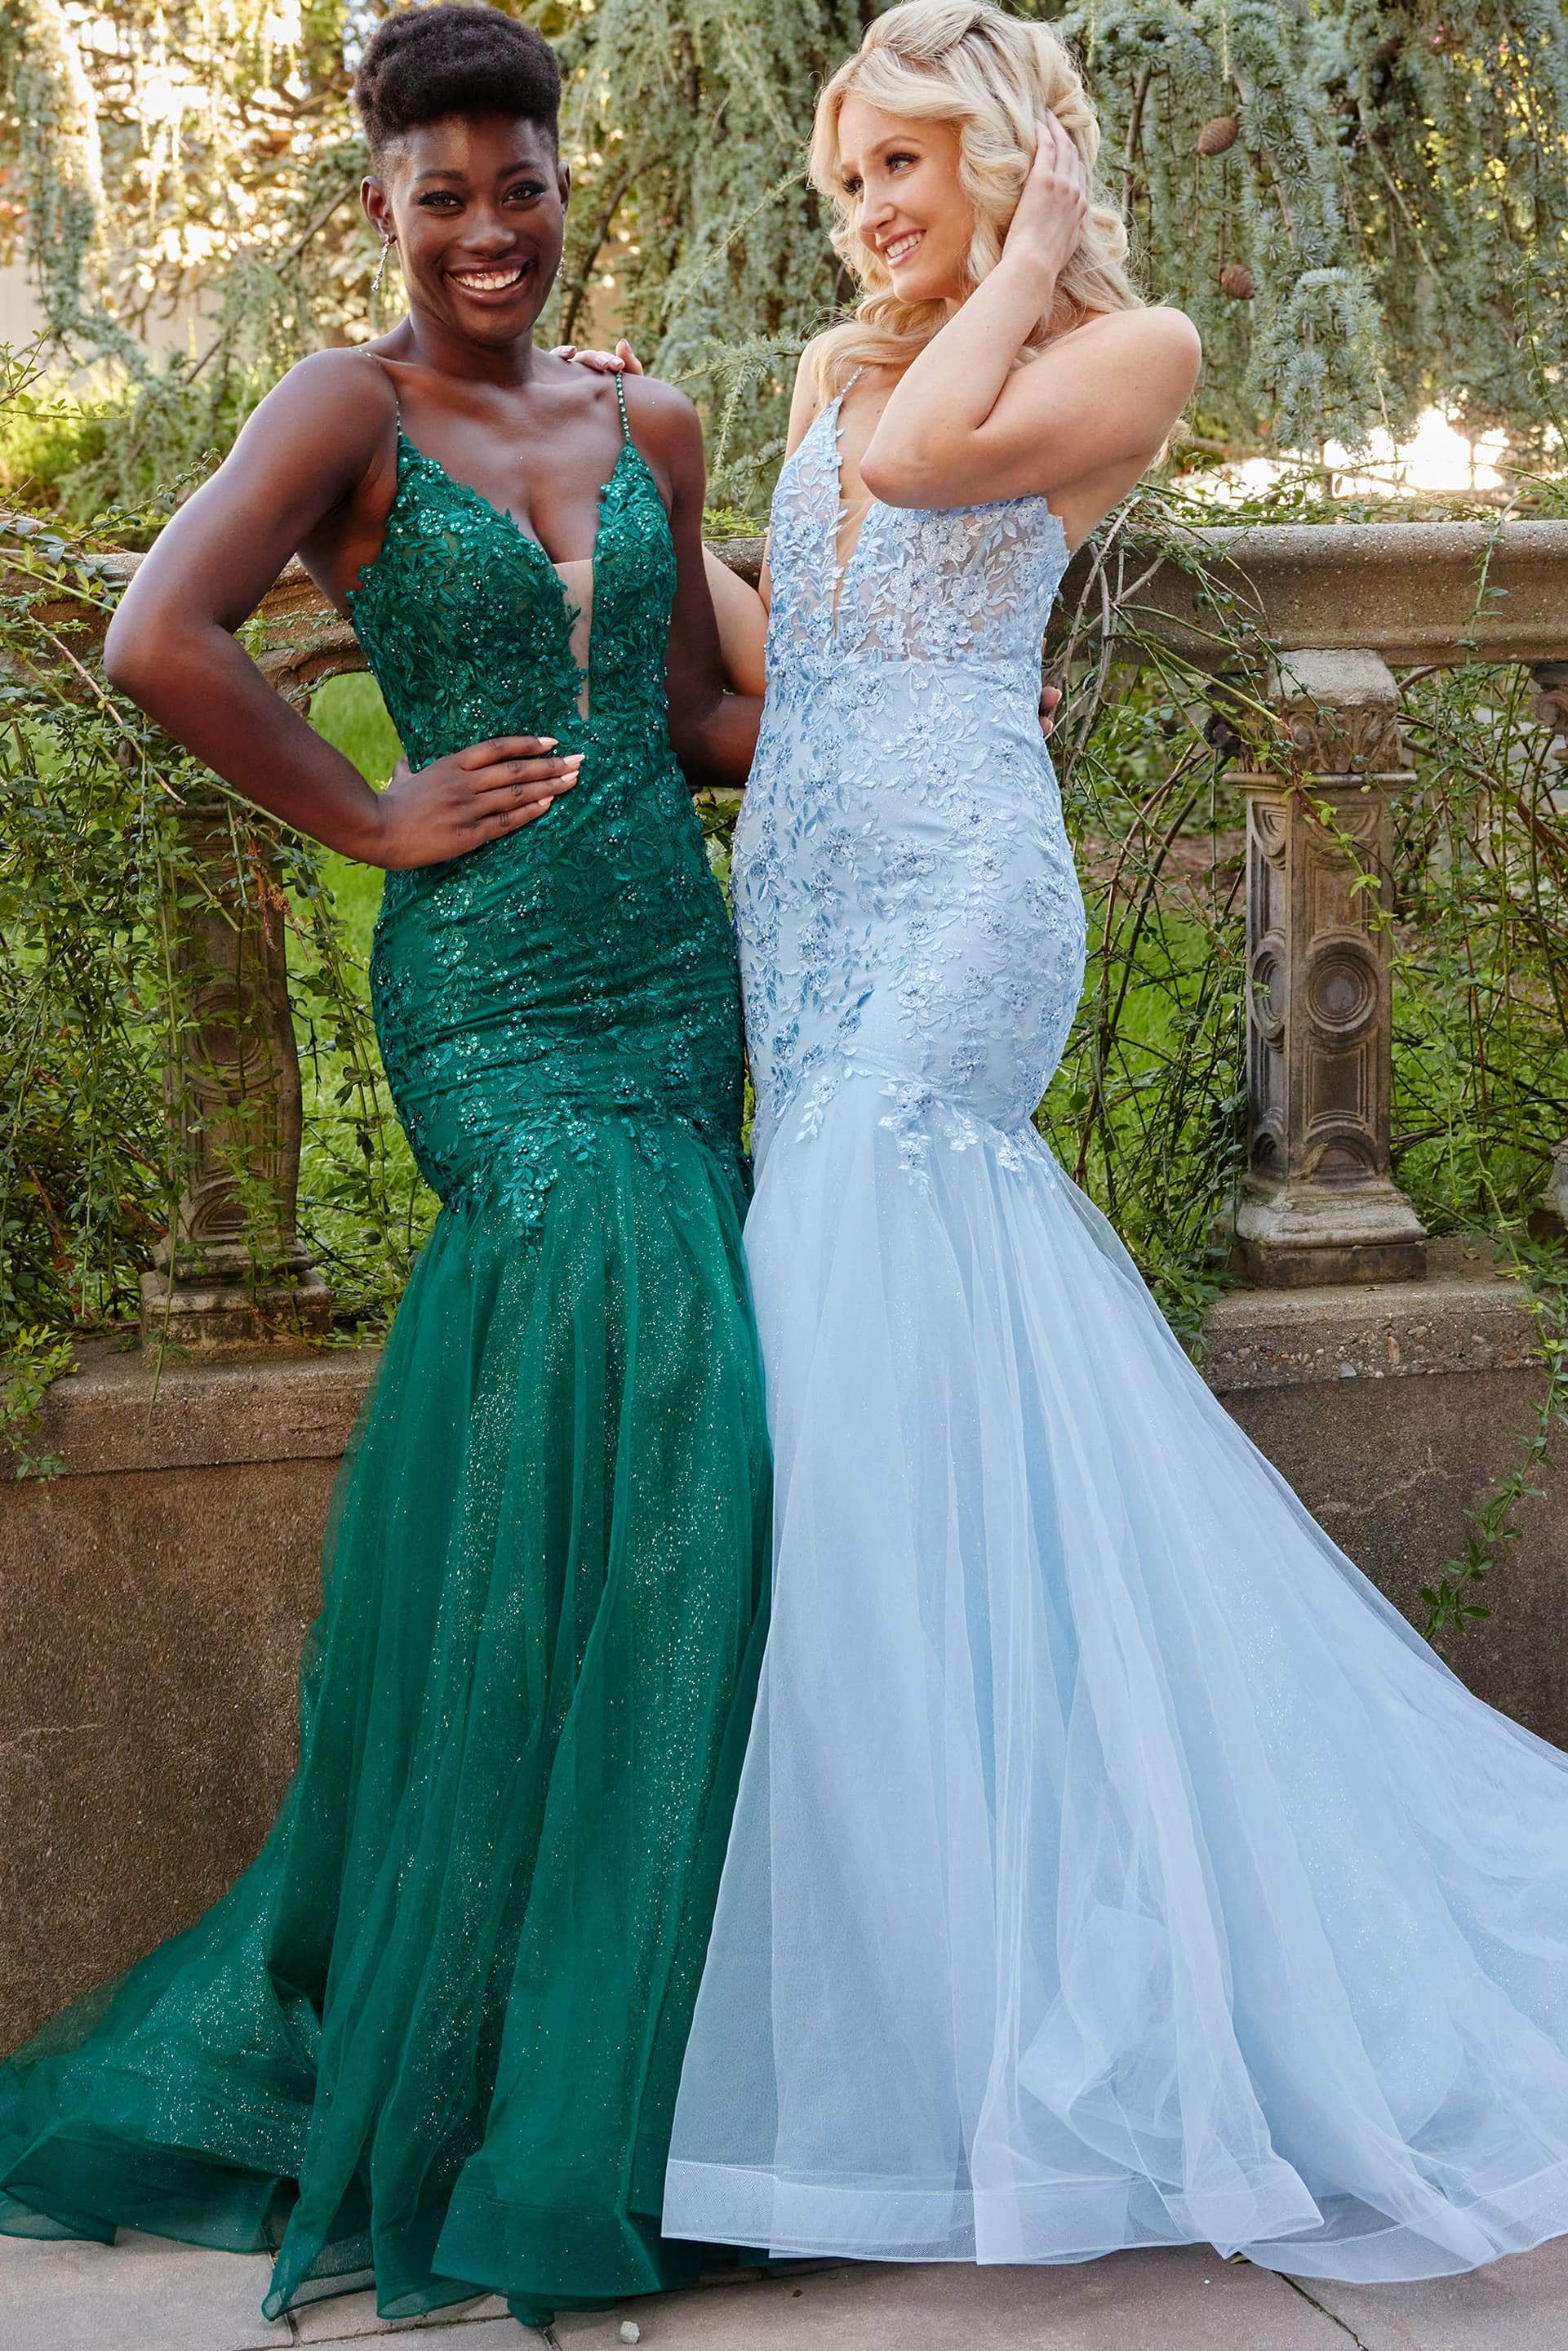 How to Match Your Prom Dress to Your Date - Jovani Guide